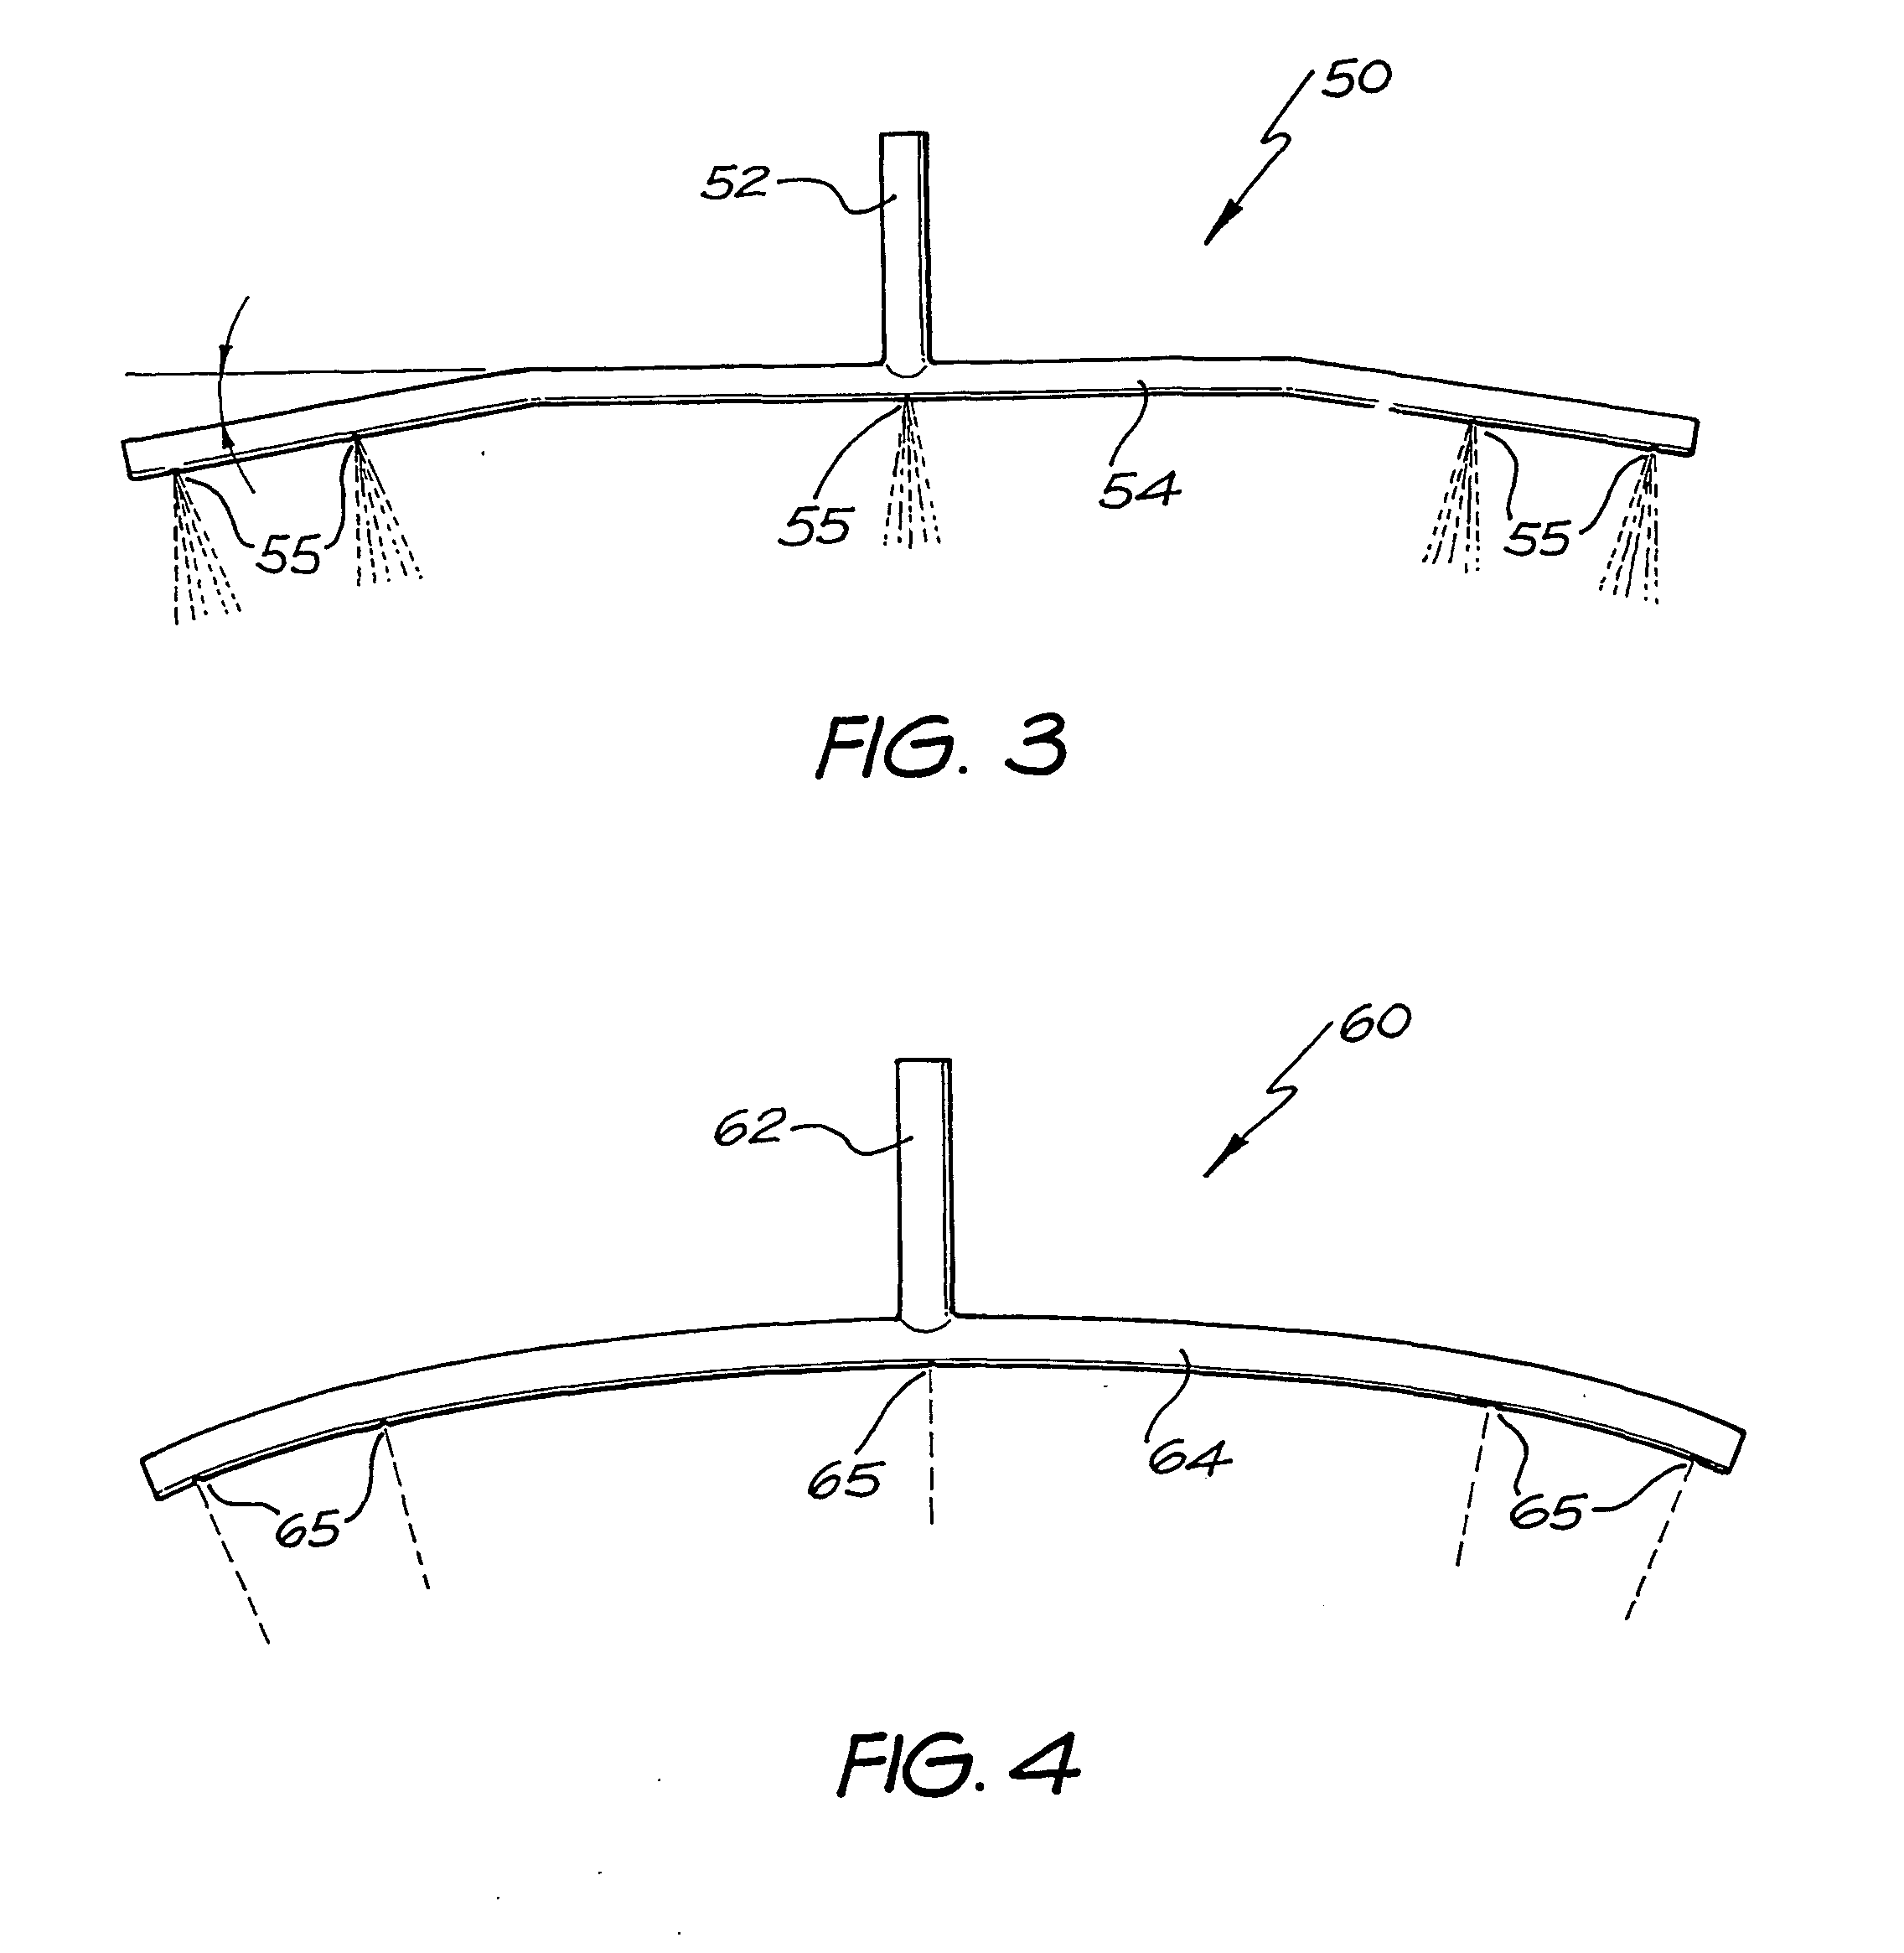 Pour-on application method and devices